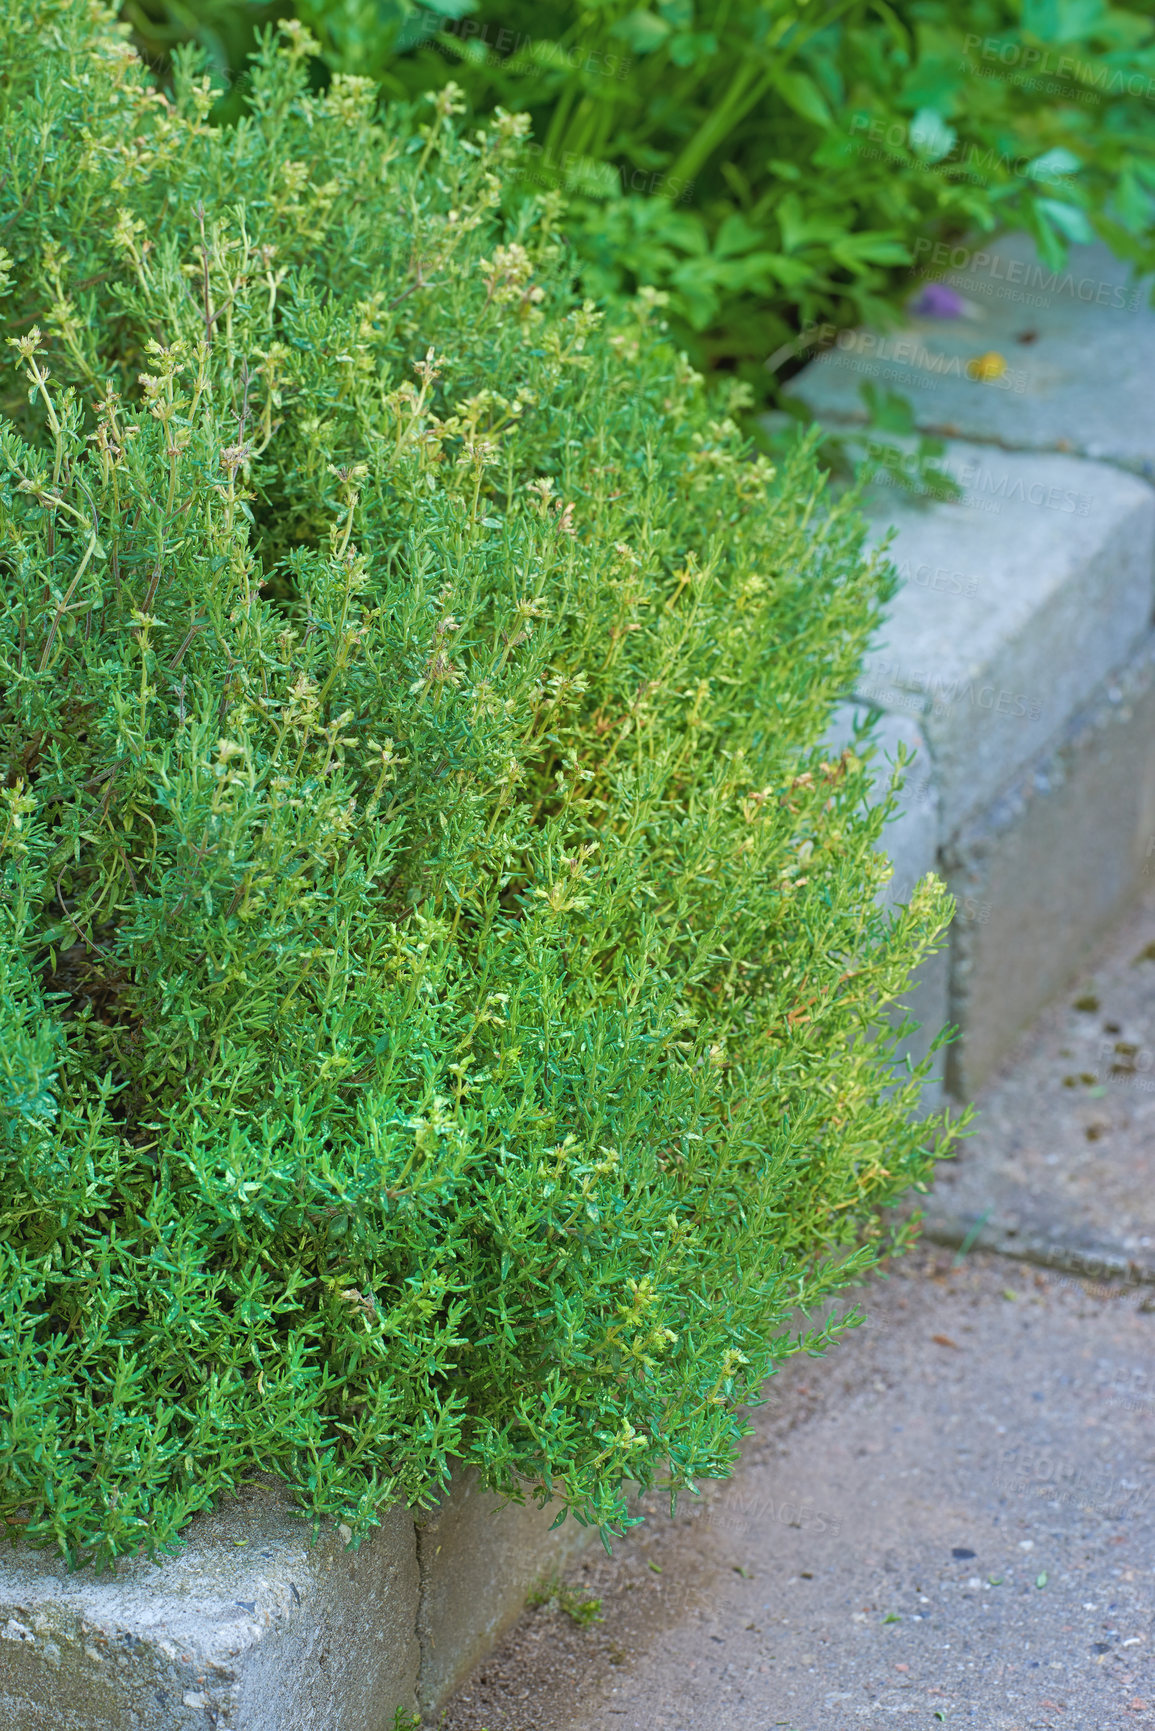 Buy stock photo Overgrown wild herb garden growing on a cement curb or sidewalk. Various plants in a lush flowerbed in nature. Different green shrubs, parsley, sage and rosemary growing in a vibrant backyard